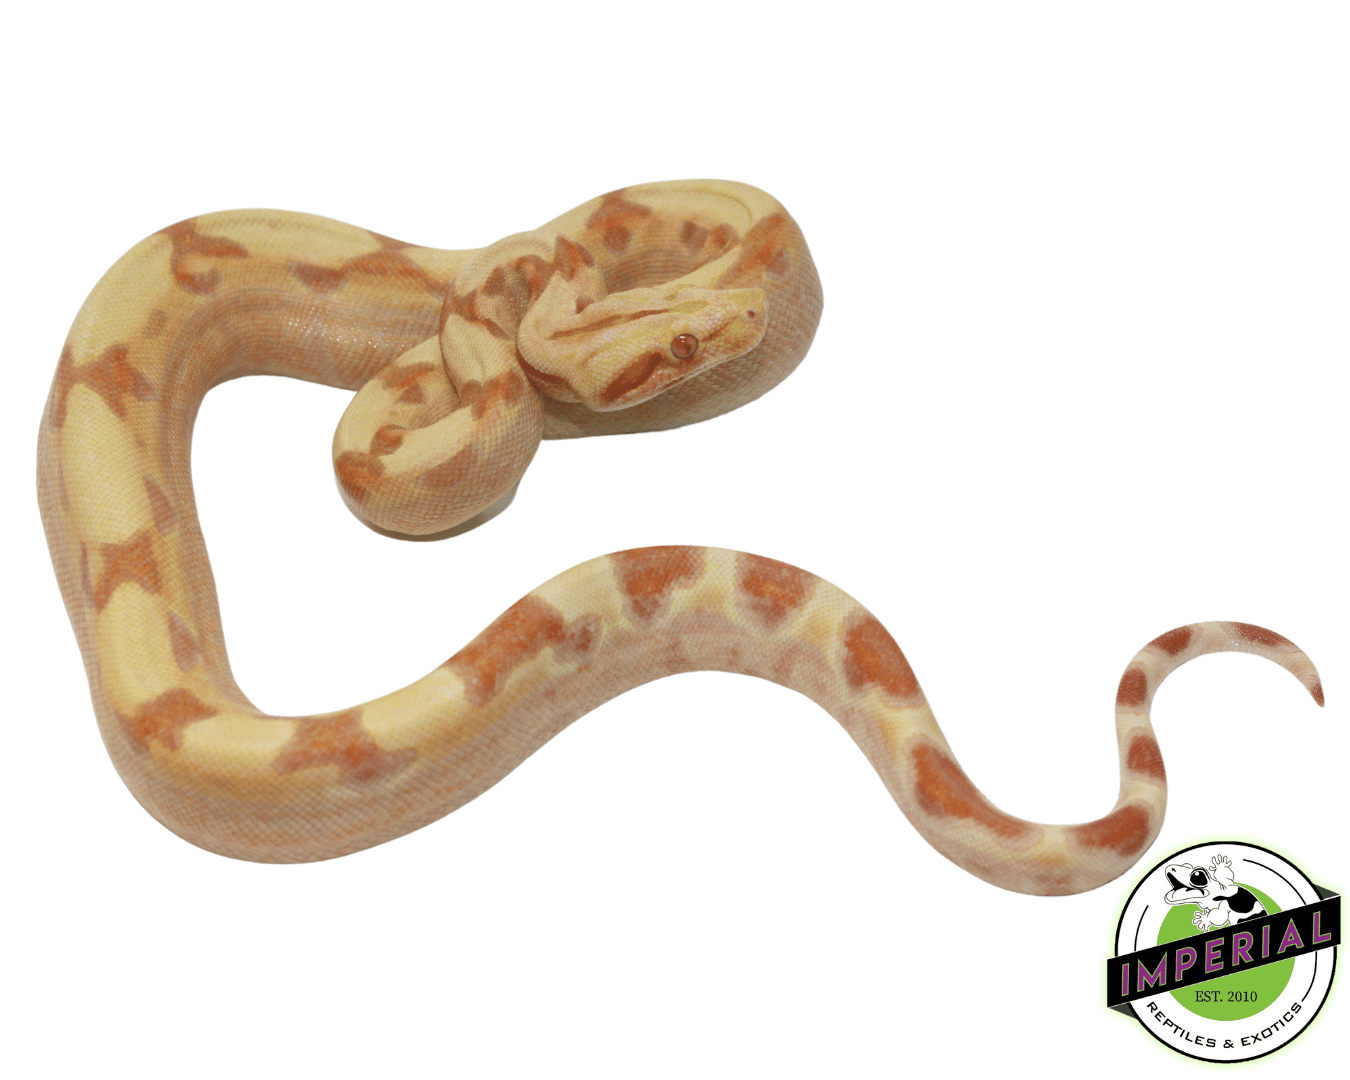 sunglow colombian boa constrictor for sale, buy reptiles online